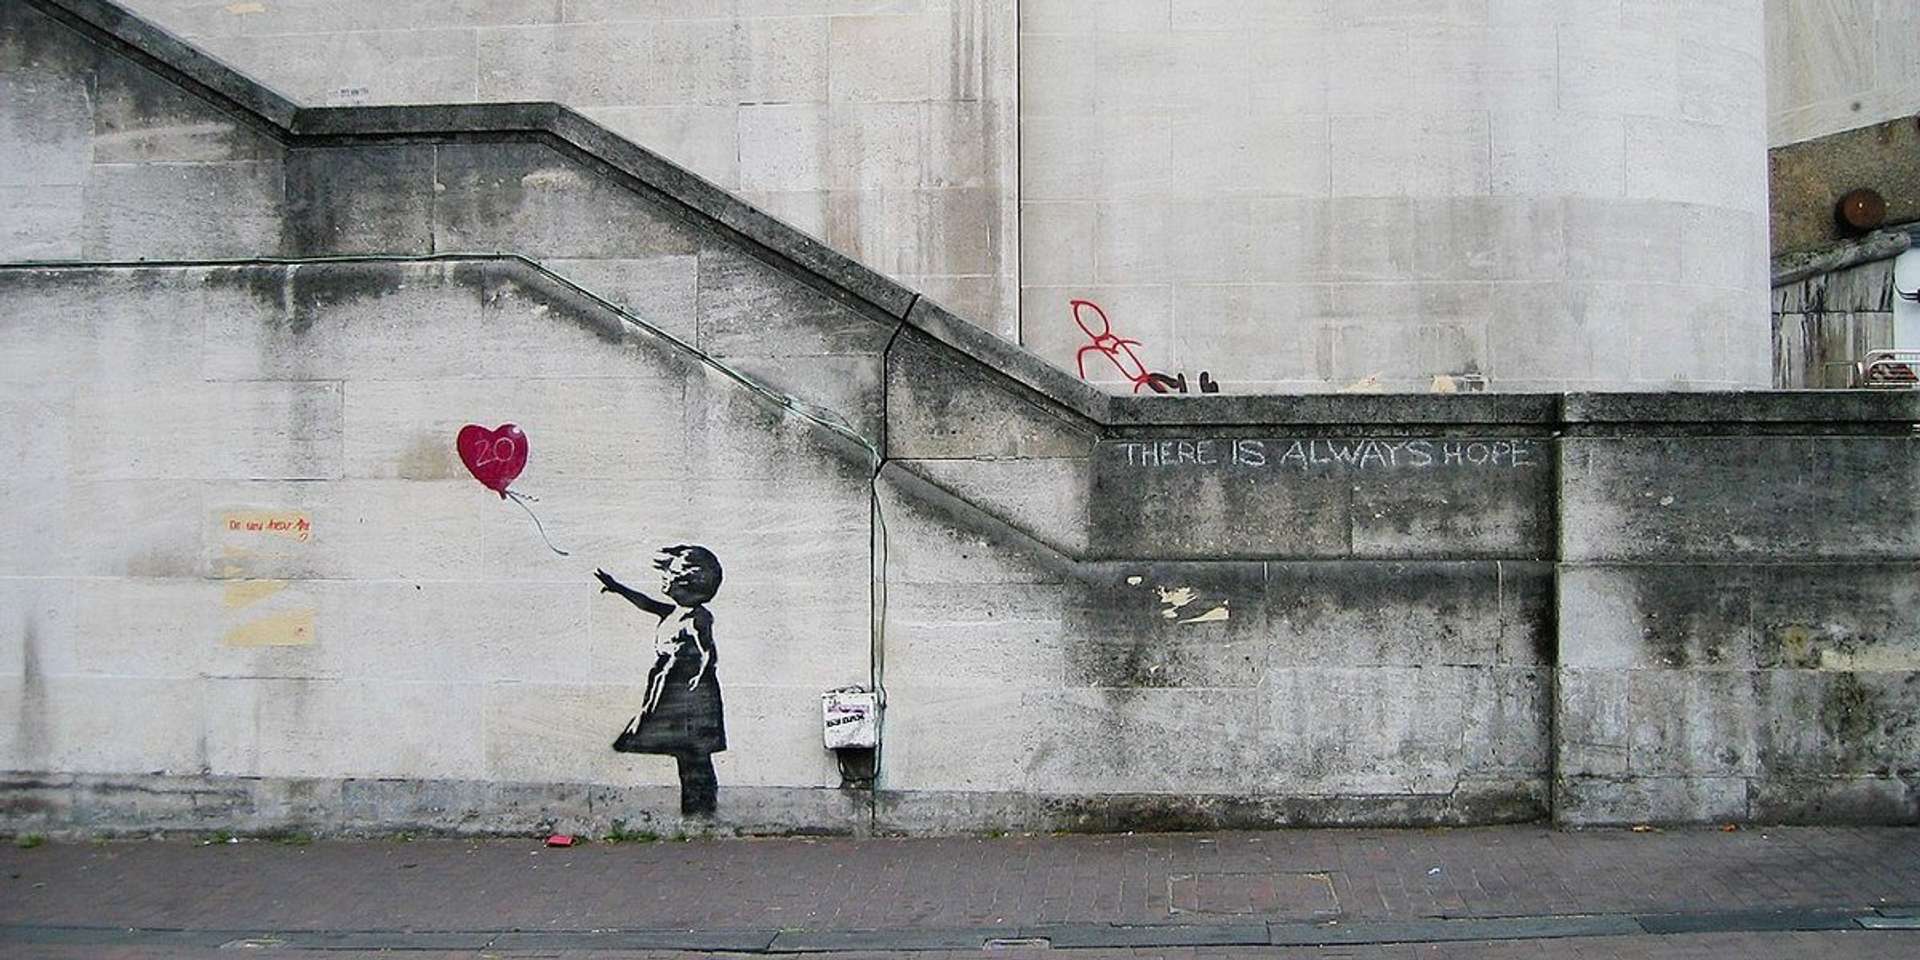 Girl With Balloon by Banksy